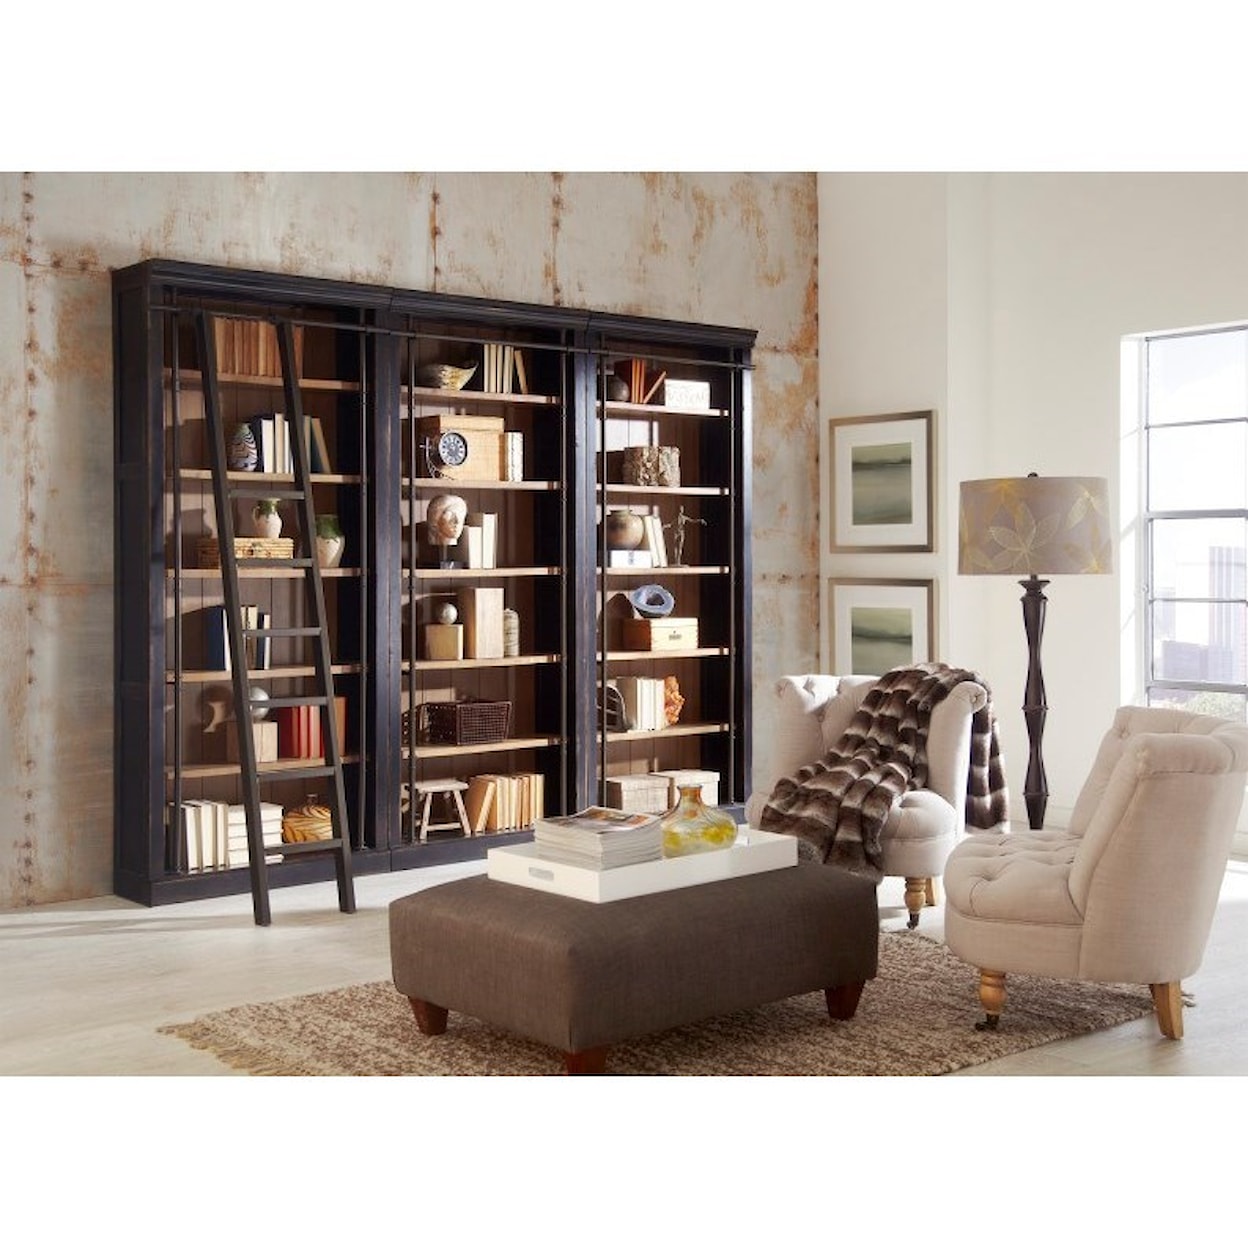 Martin Home Furnishings Toulouse Bookcase and Ladder